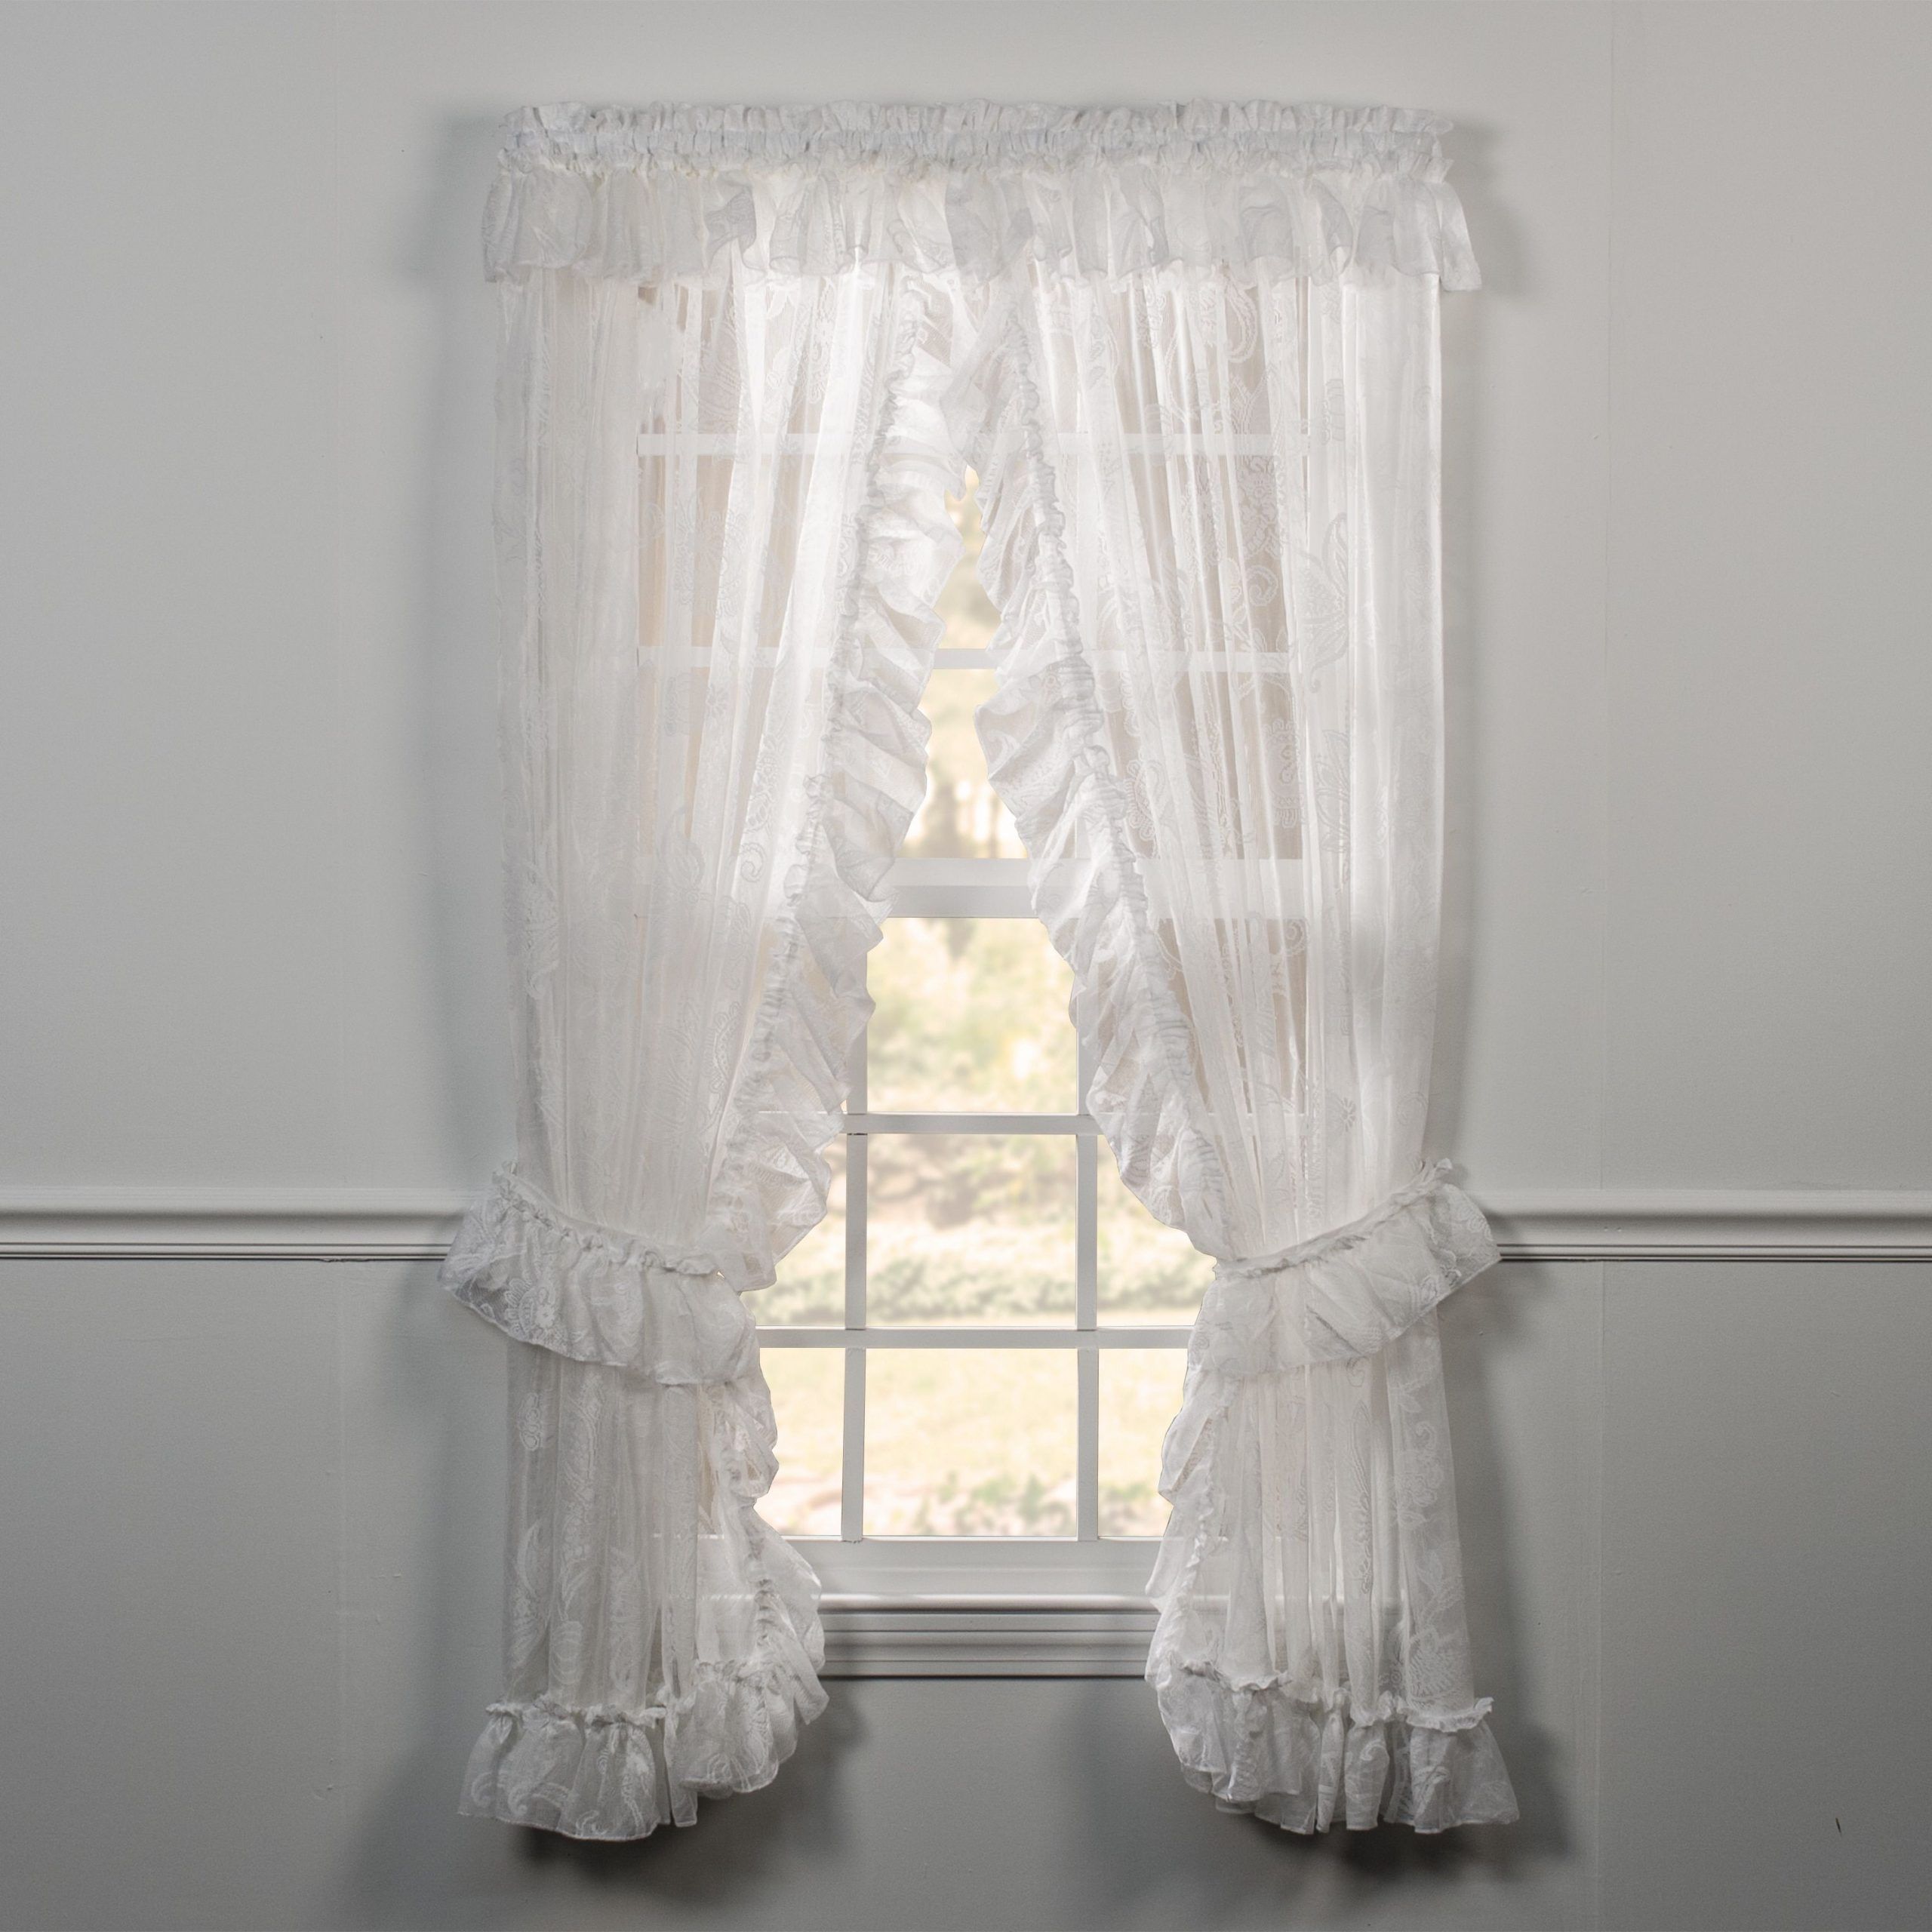 Ellis Curtain Beverly Lace Priscilla Curtain Pair With Ties Throughout Elegant White Priscilla Lace Kitchen Curtain Pieces (View 5 of 20)